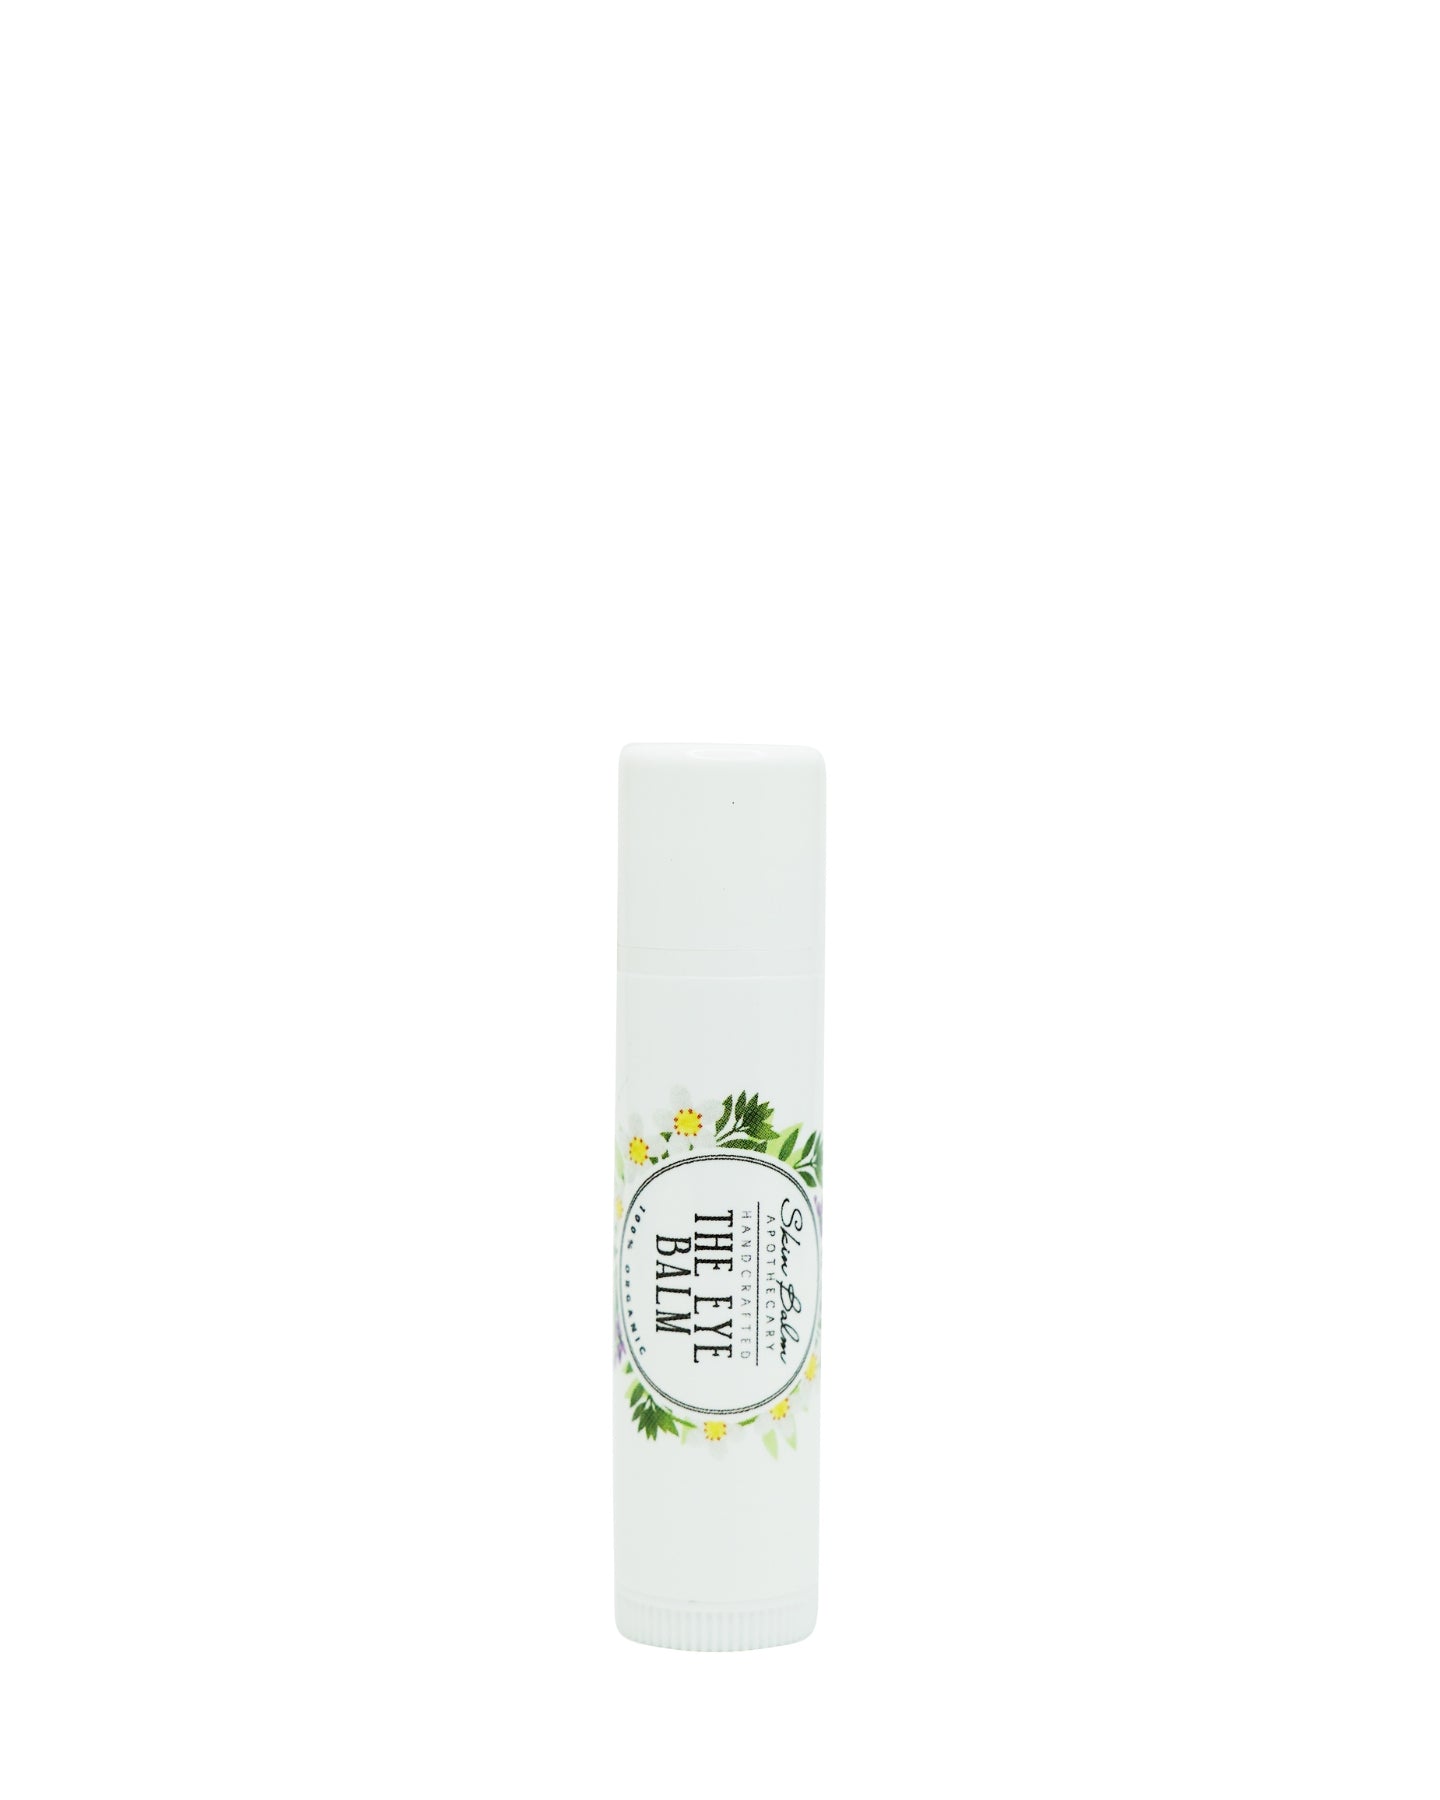 The Eye Balm™ against a white background.